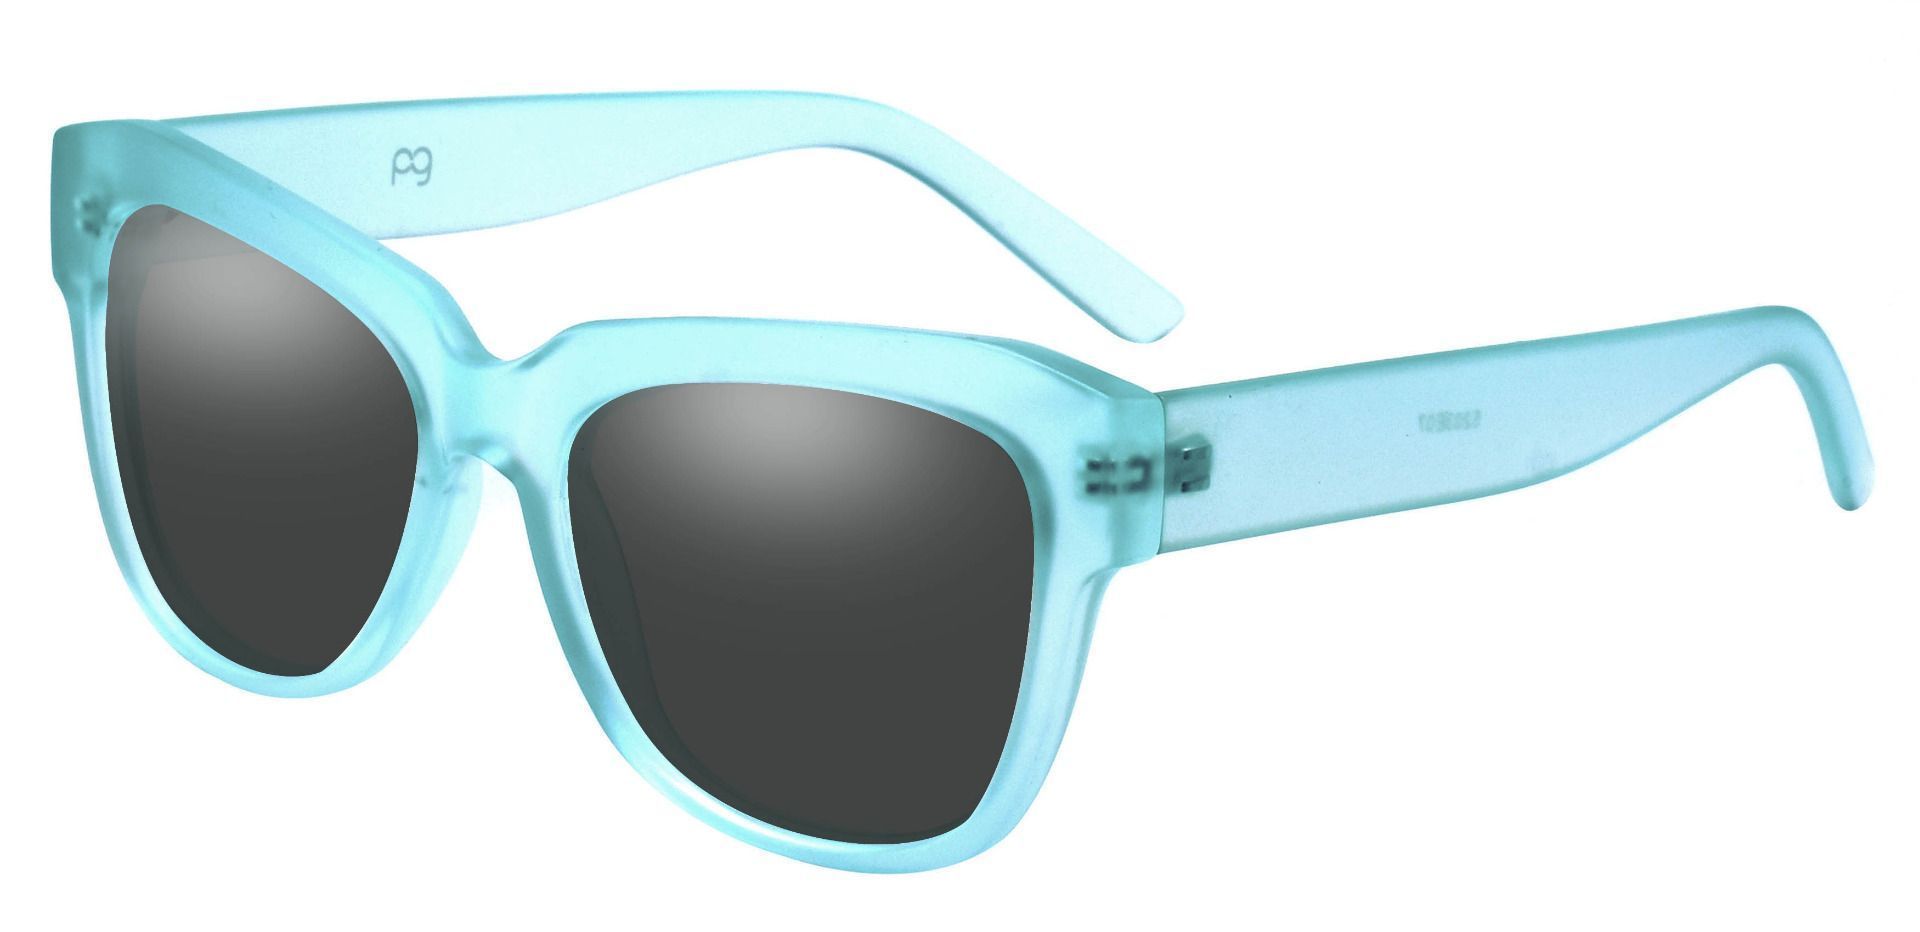 Gina Cat-Eye Non-Rx Sunglasses - Blue Frame With Gray Lenses